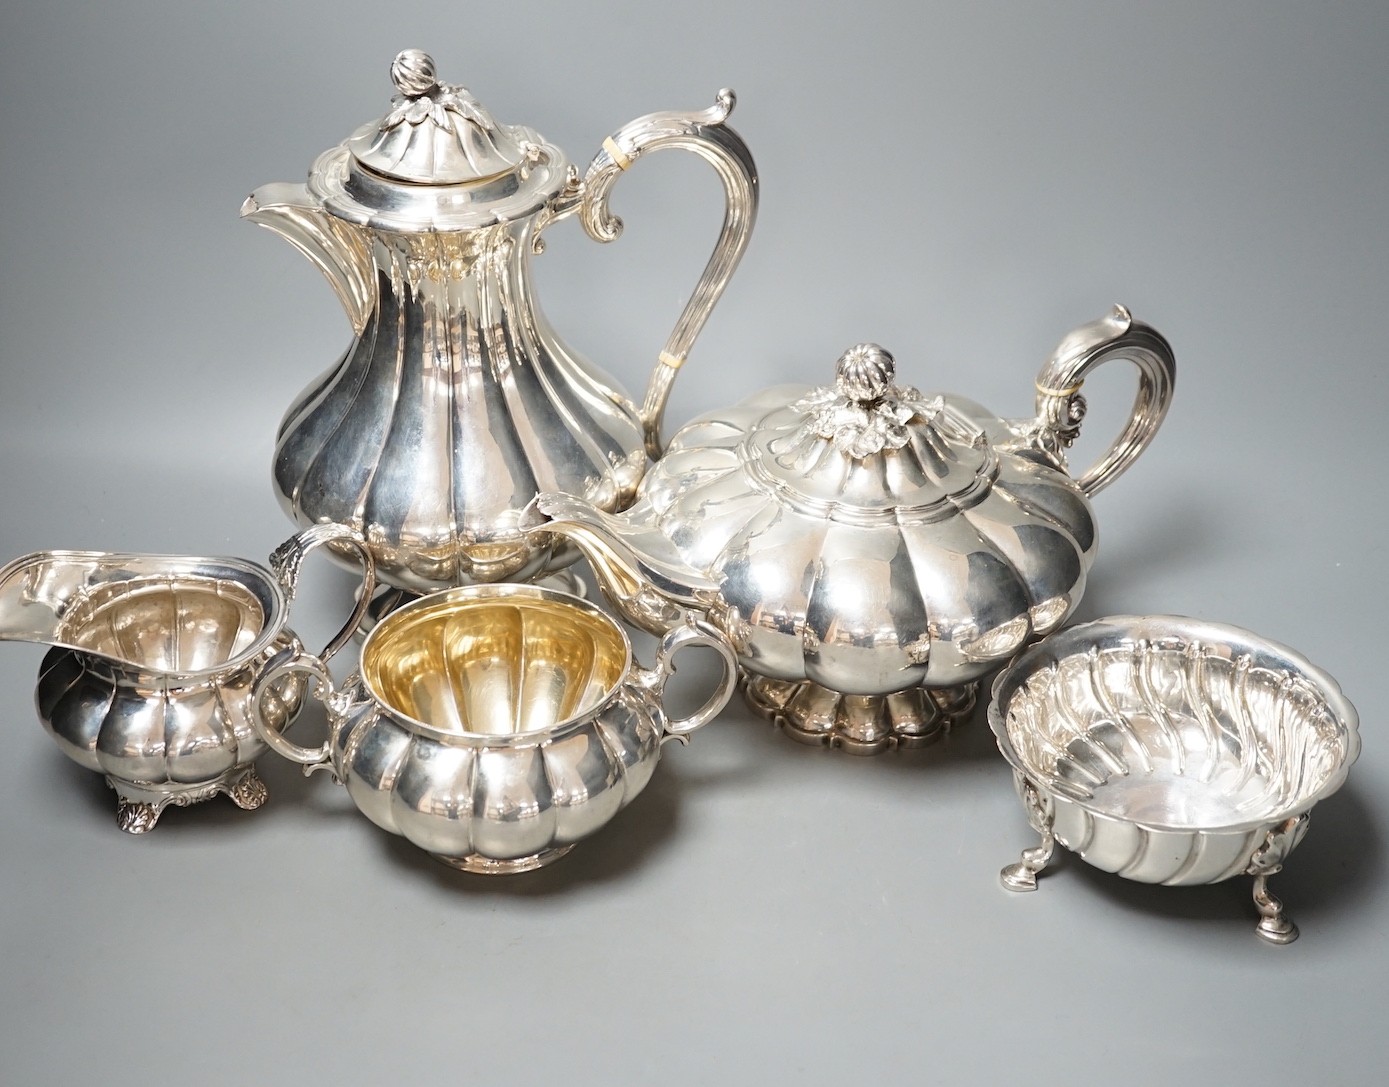 A matched harlequin 19th and 20th century fluted silver four piece tea set, teapot The Barnards, London, 1838, sugar bowl Edward & John Barnard, London, 1857, cream jug marks rubbed, and coffee pot William Hutton & Sons,